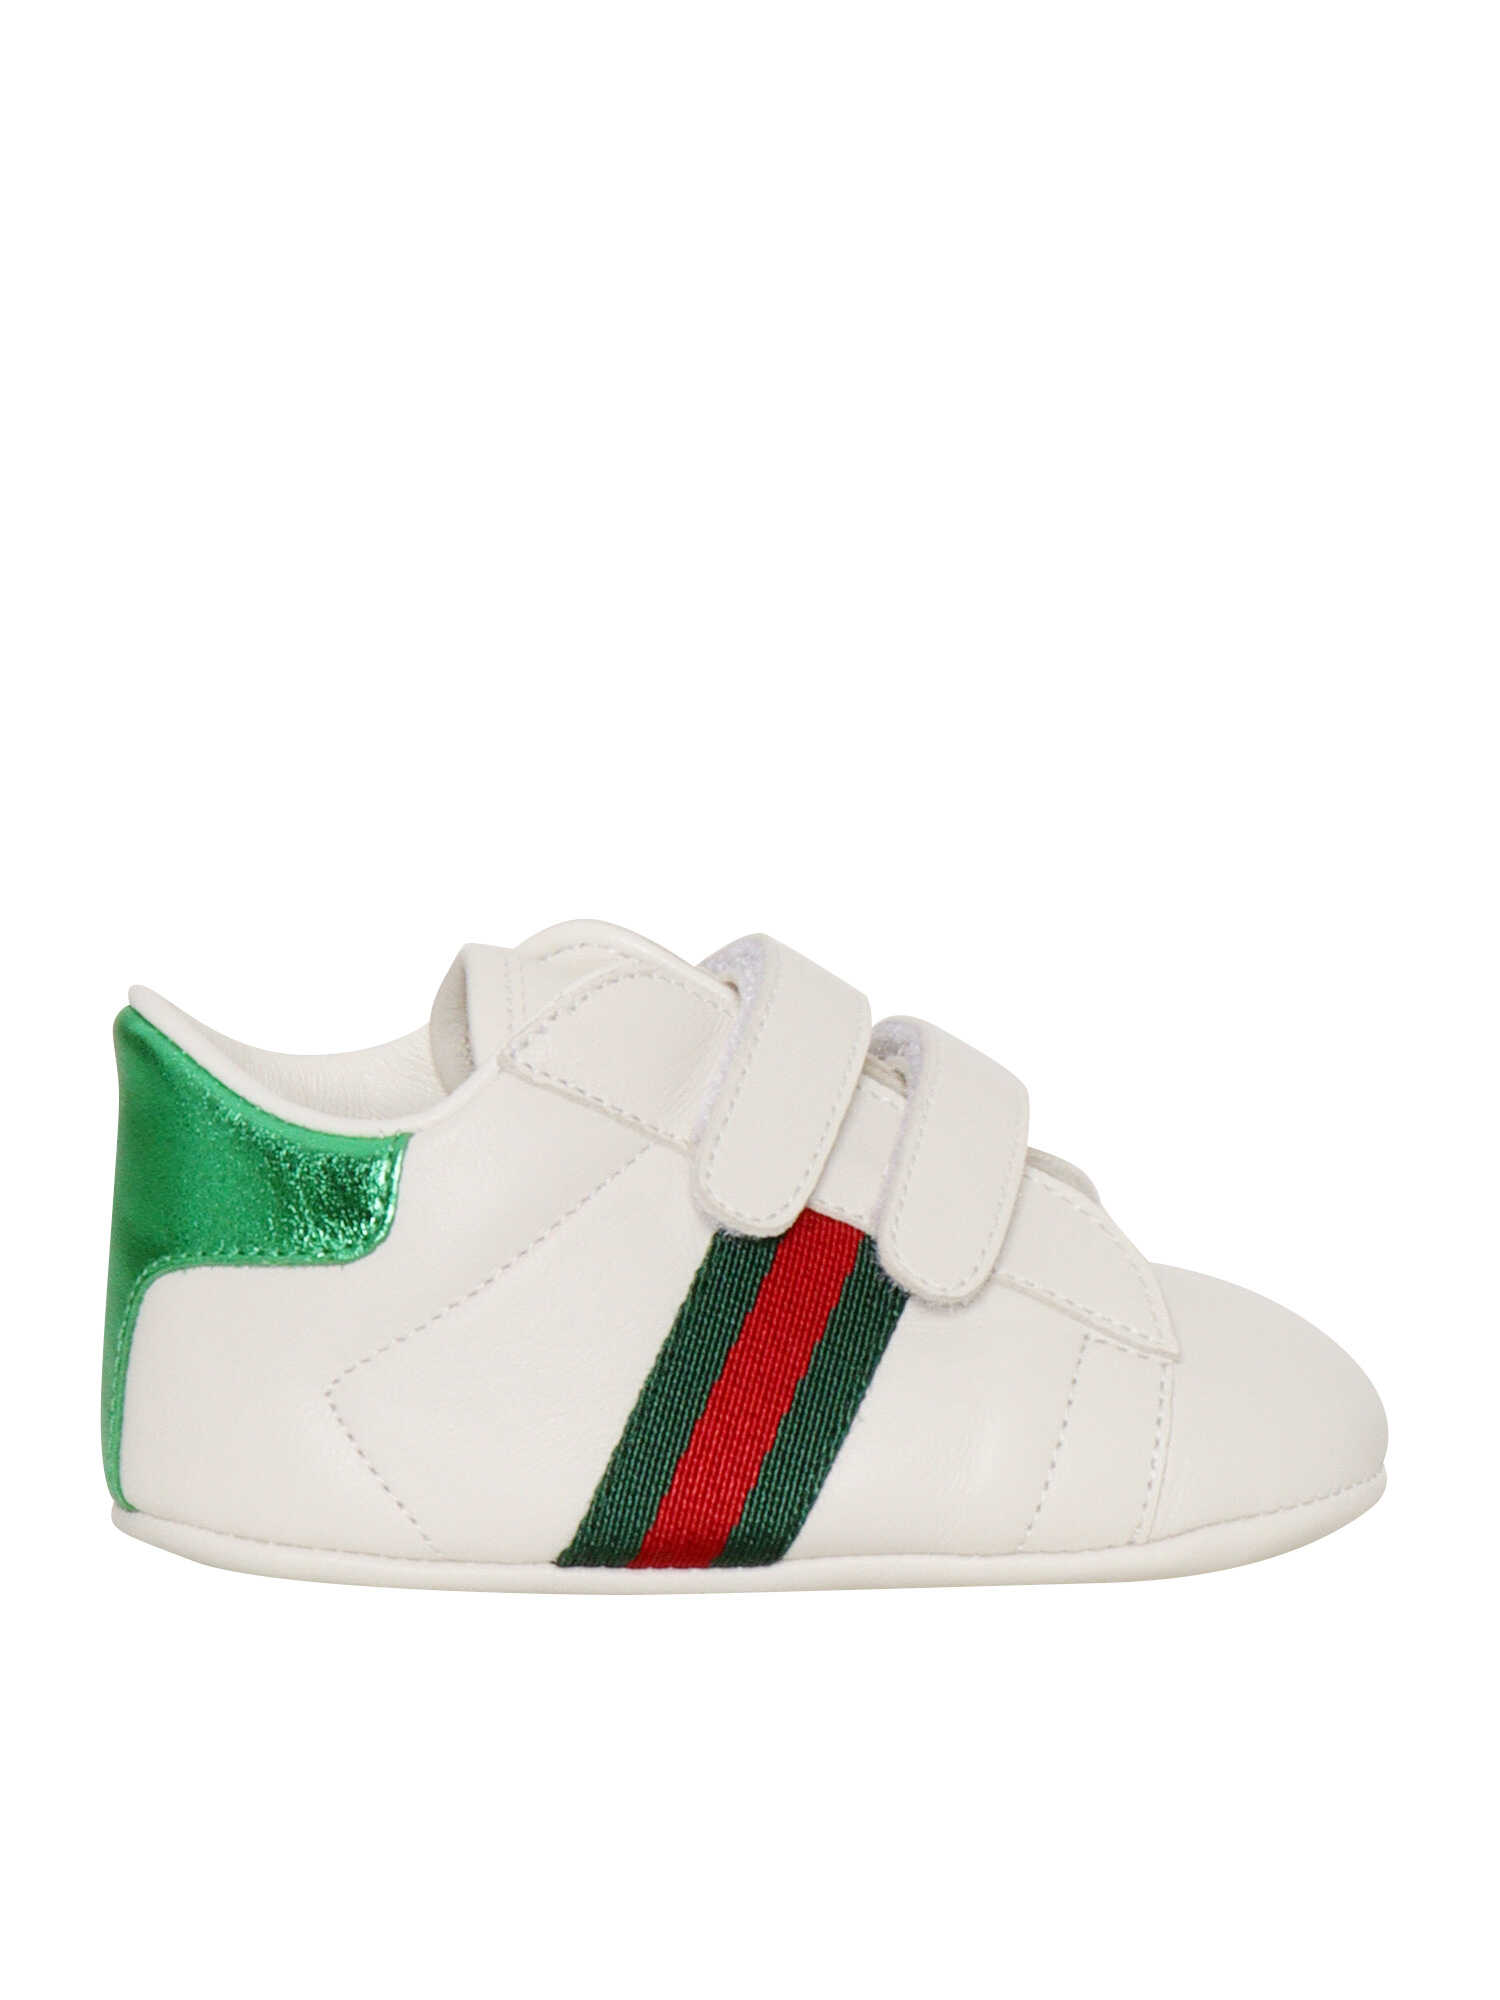 Gucci Baby New Ace sneakers White